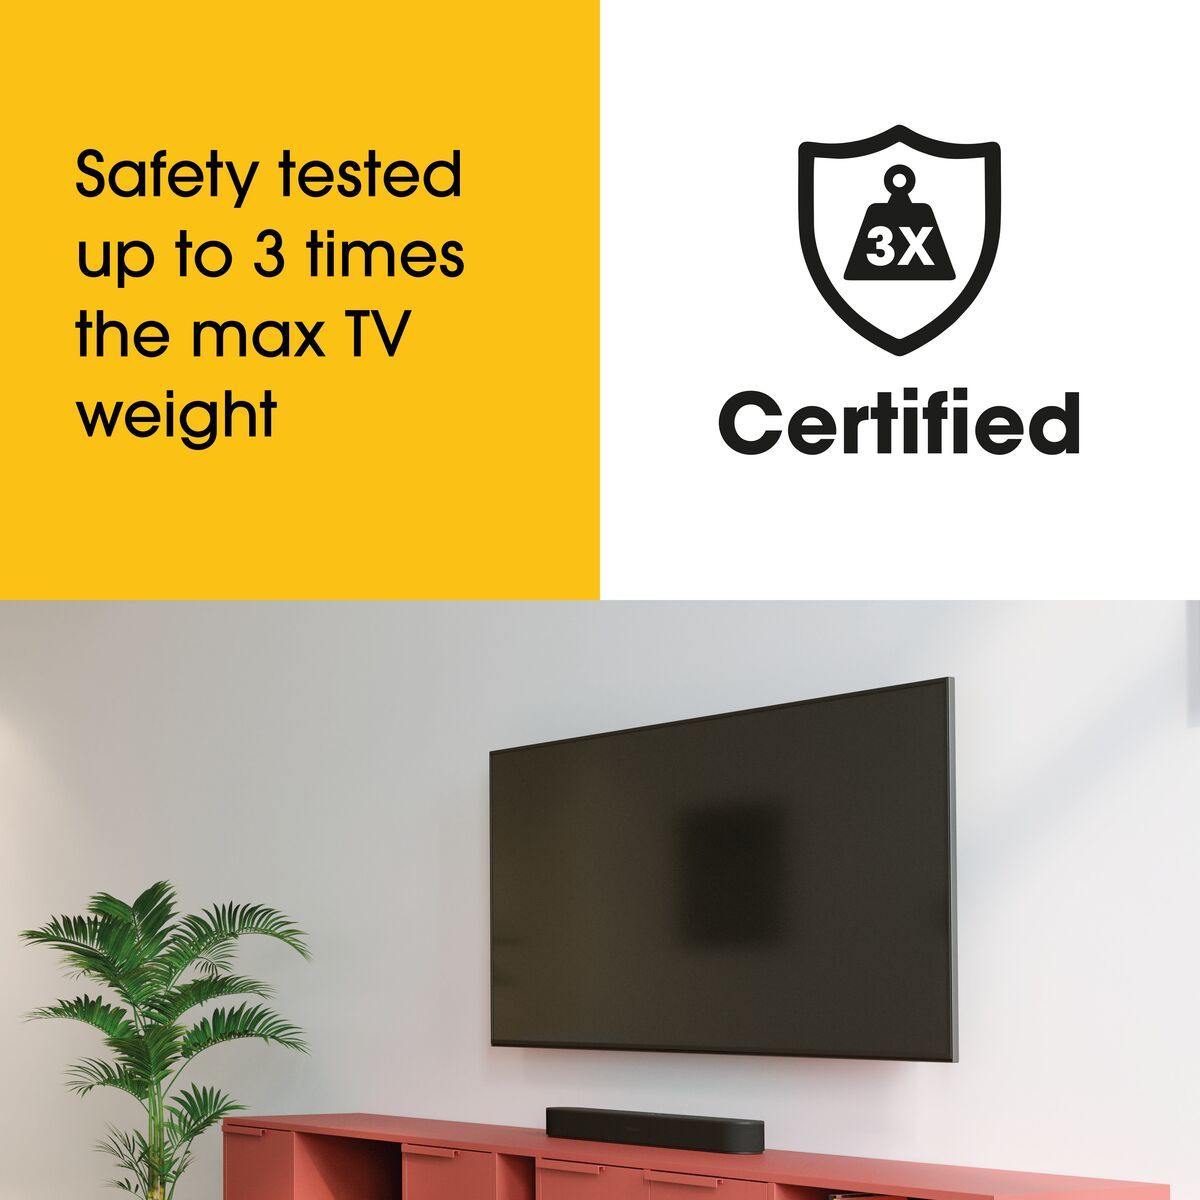 Vogel's MA 3030 Full-Motion TV Wall Mount - Suitable for 32 up to 65 inch TVs - Motion (up to 120°) - Tilt up to 15° - USP